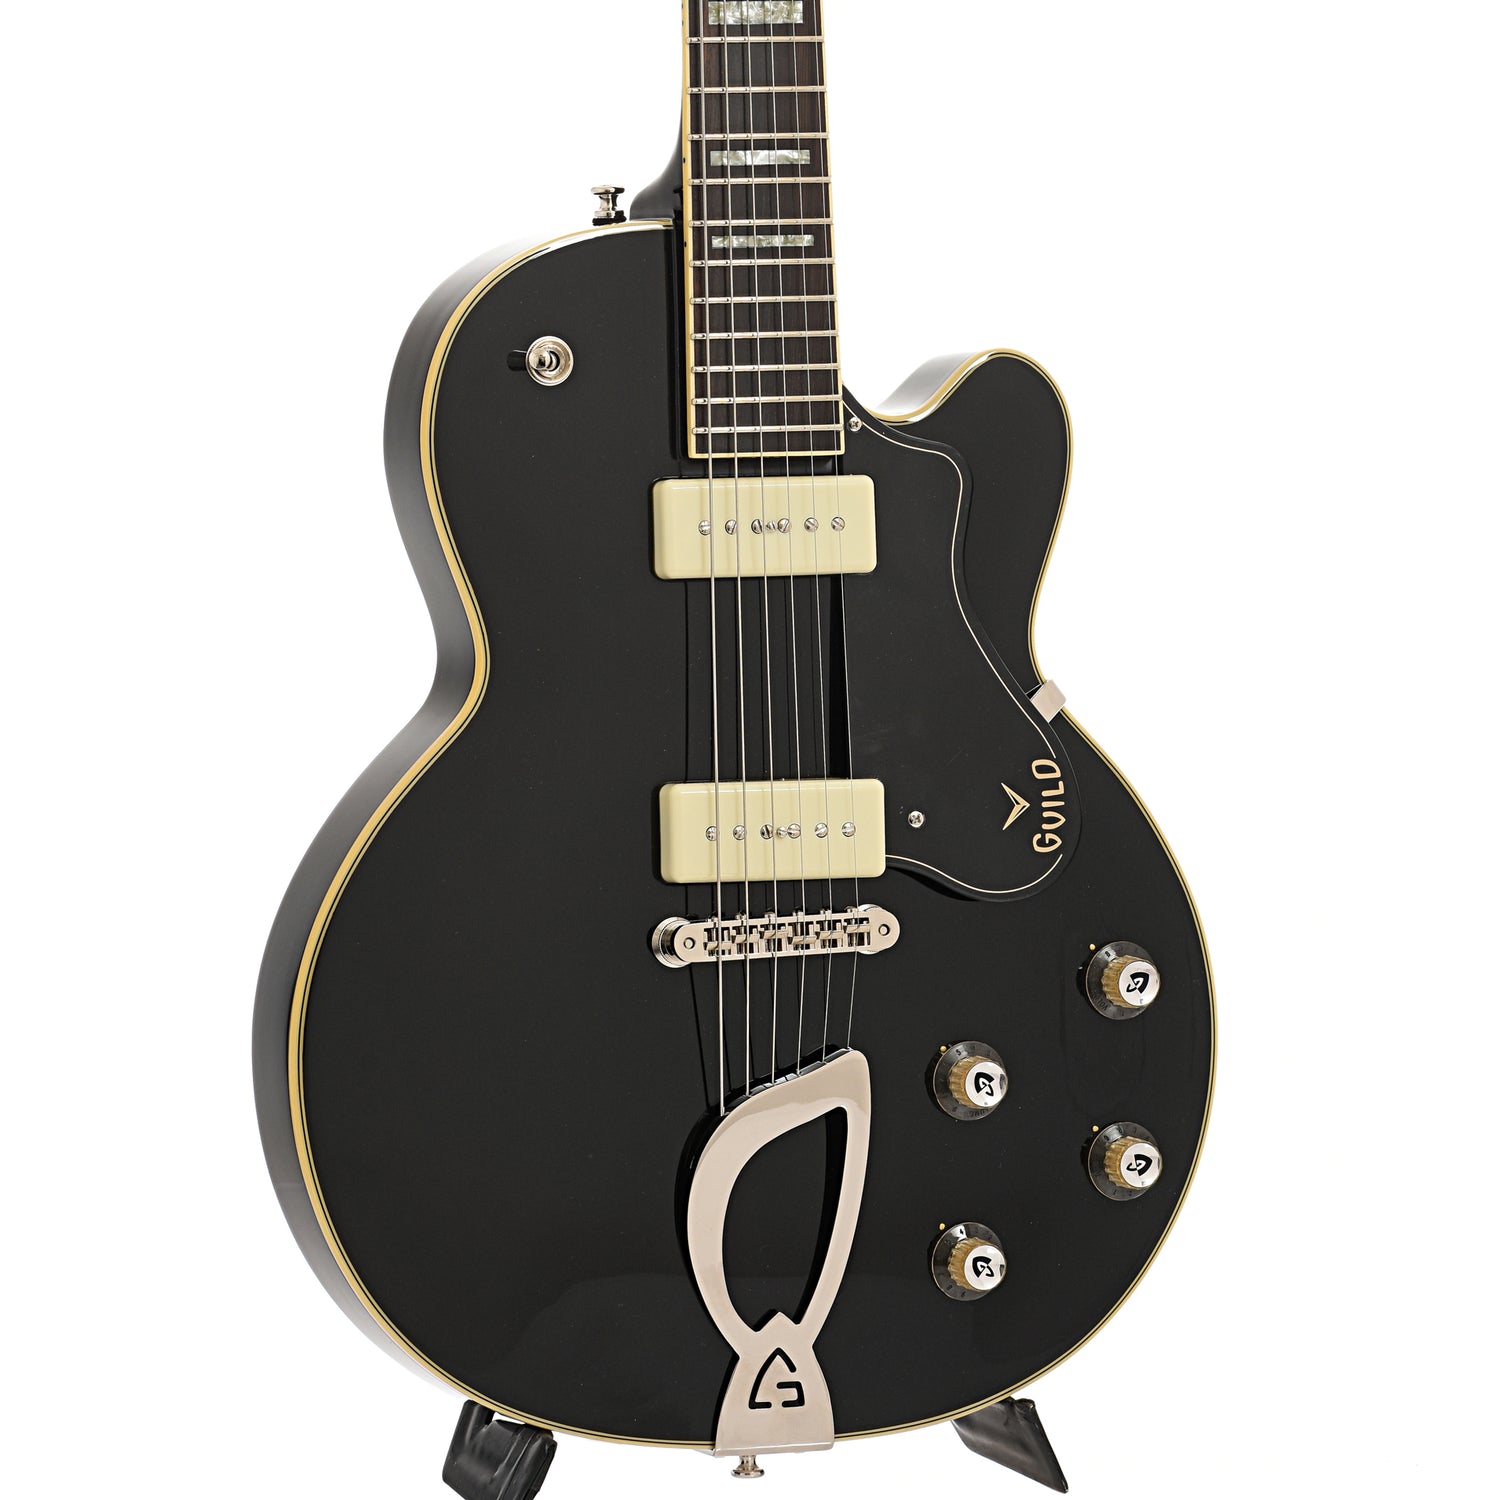 Front and side of Guild Newark St. Collection M-75 Aristocrat Hollow Body Archtop Guitar, Limited Edition Black Finish